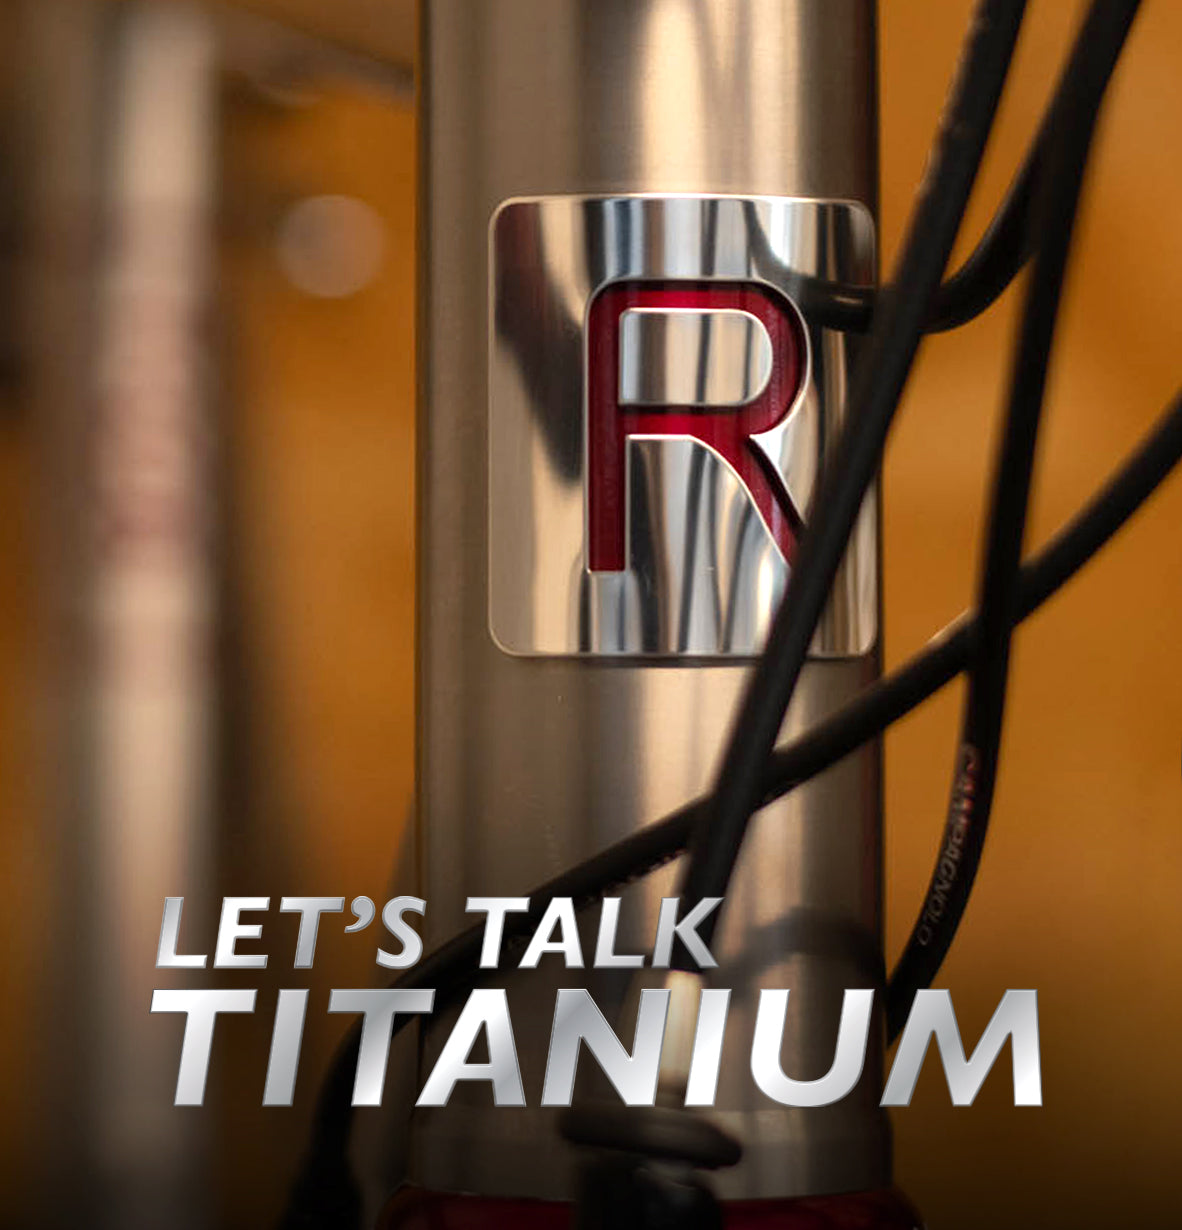 Reilly headbadge in brushed silver and red with the wording Let's Talk Titanium.